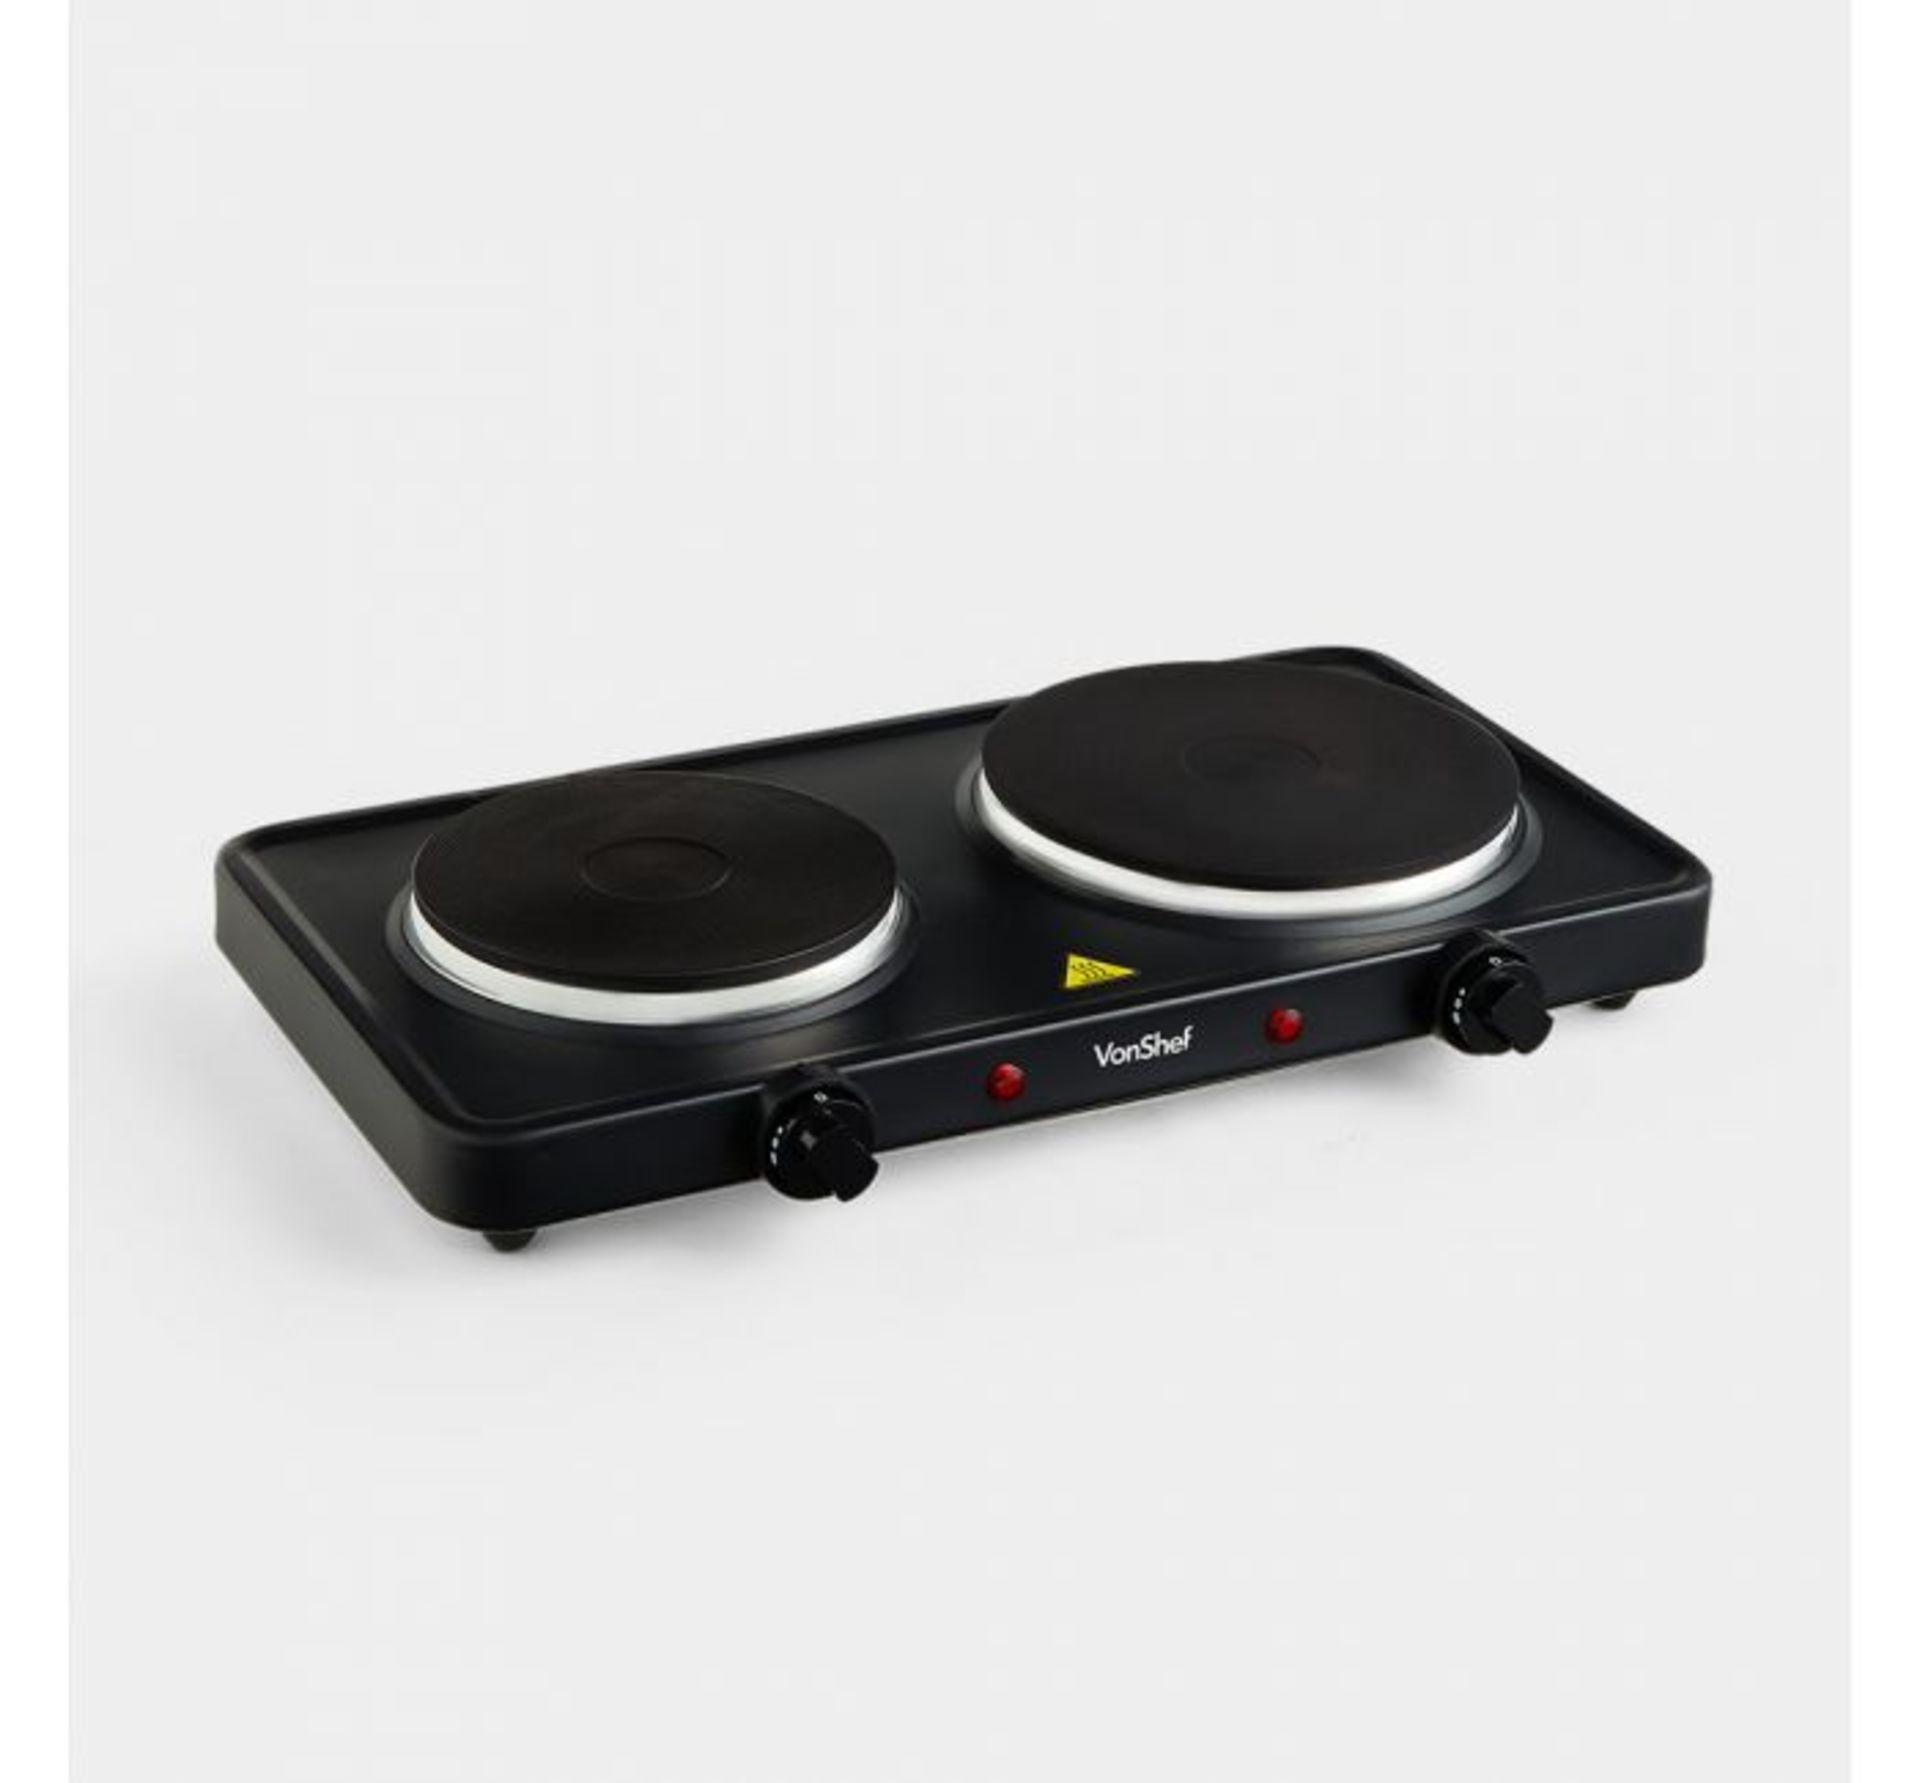 (OM28) Double Hot Plate Small, lightweight and easily portable, use the hot plate for cooking ... - Image 2 of 3